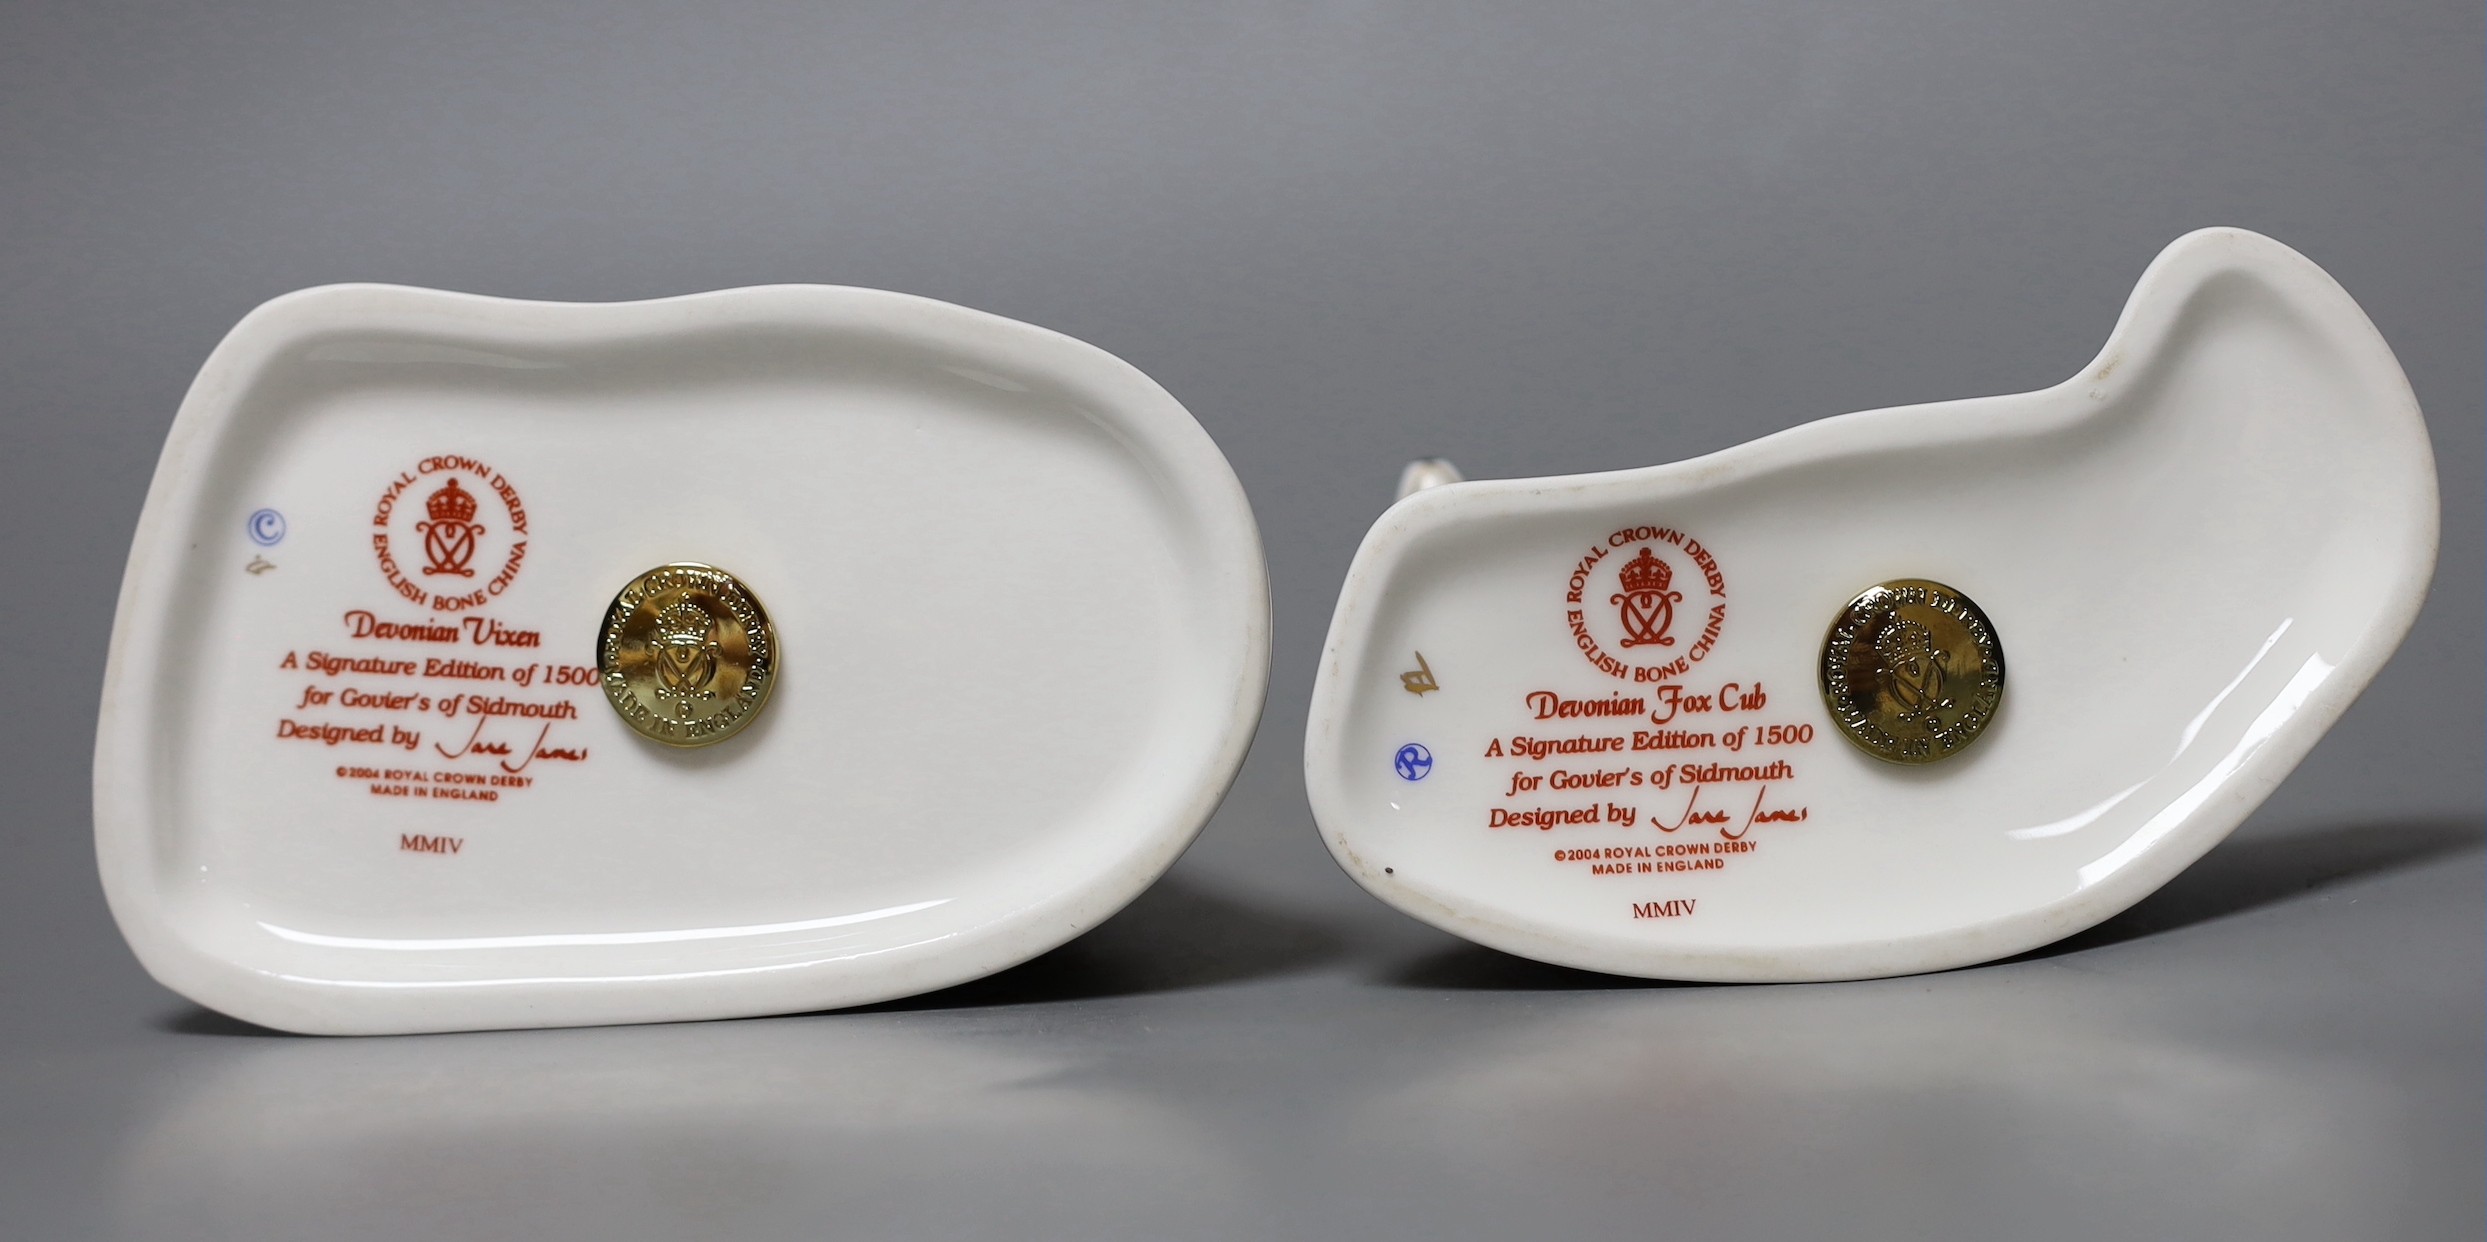 Two Royal Crown Derby paperweights - Devonian Vixen, gold stopper, boxed with certificate and Devonian Fox Cub, gold stopper, boxed with certificate